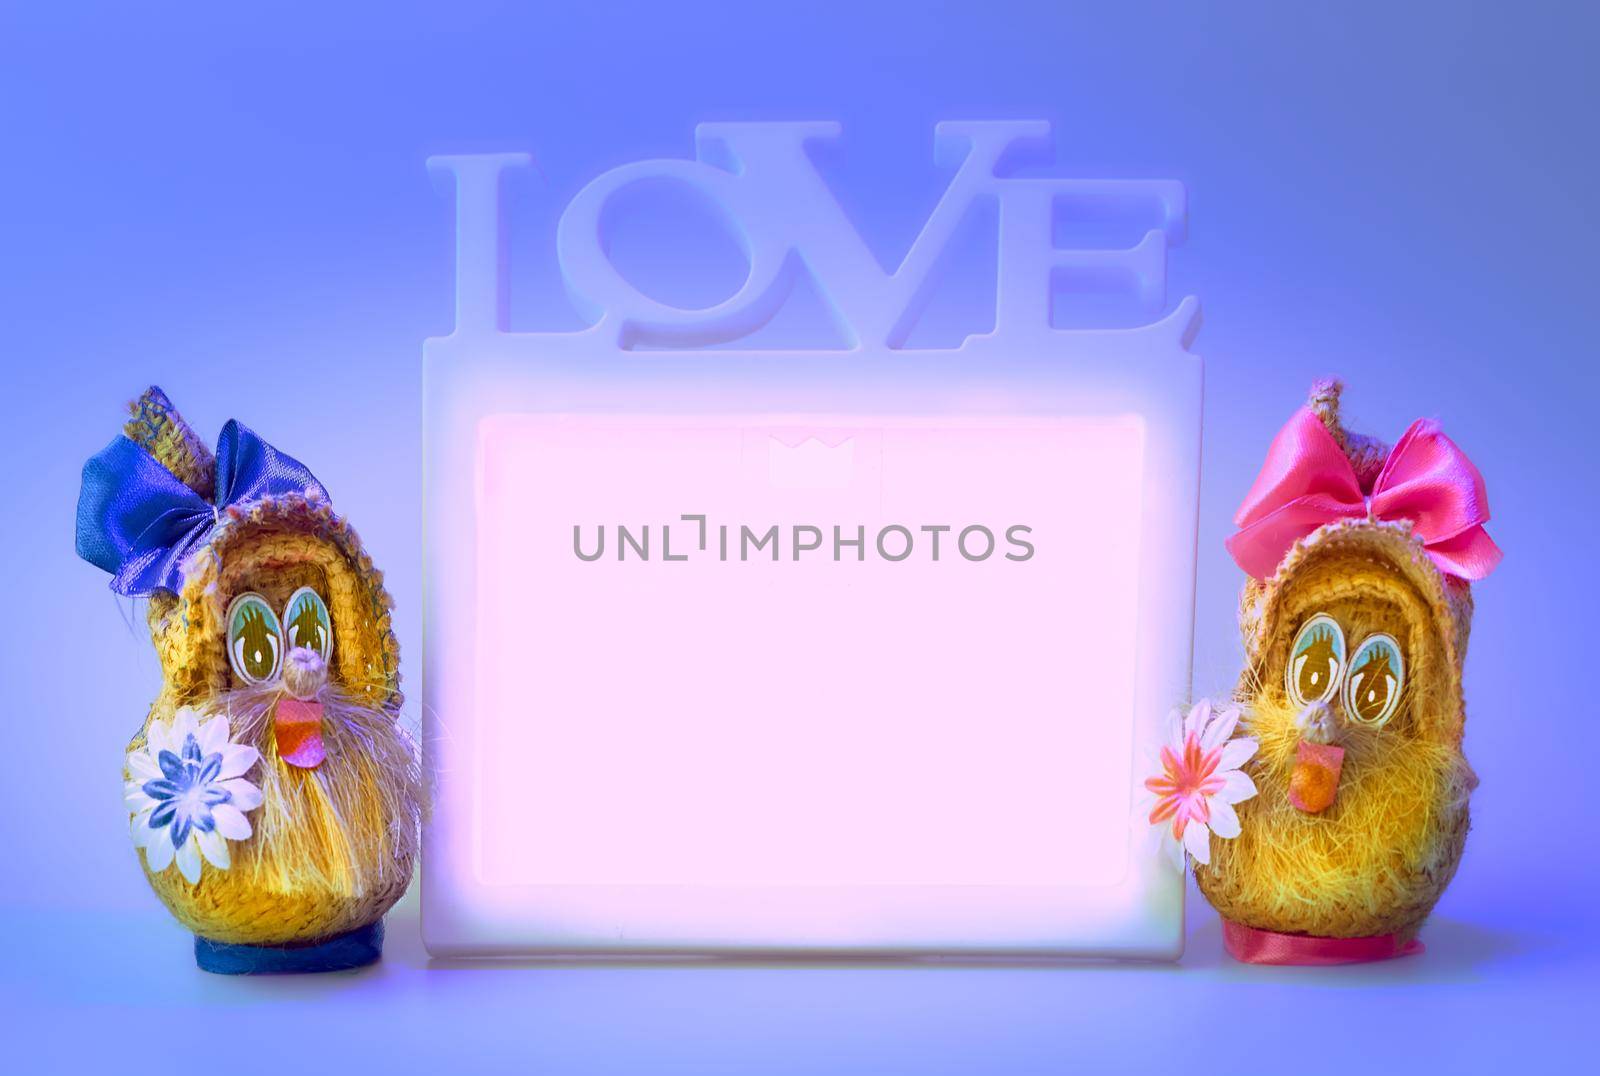 Two funny gnomes and love frame on a blue background. a rigid structure that surrounds or encloses something such as a door or window.